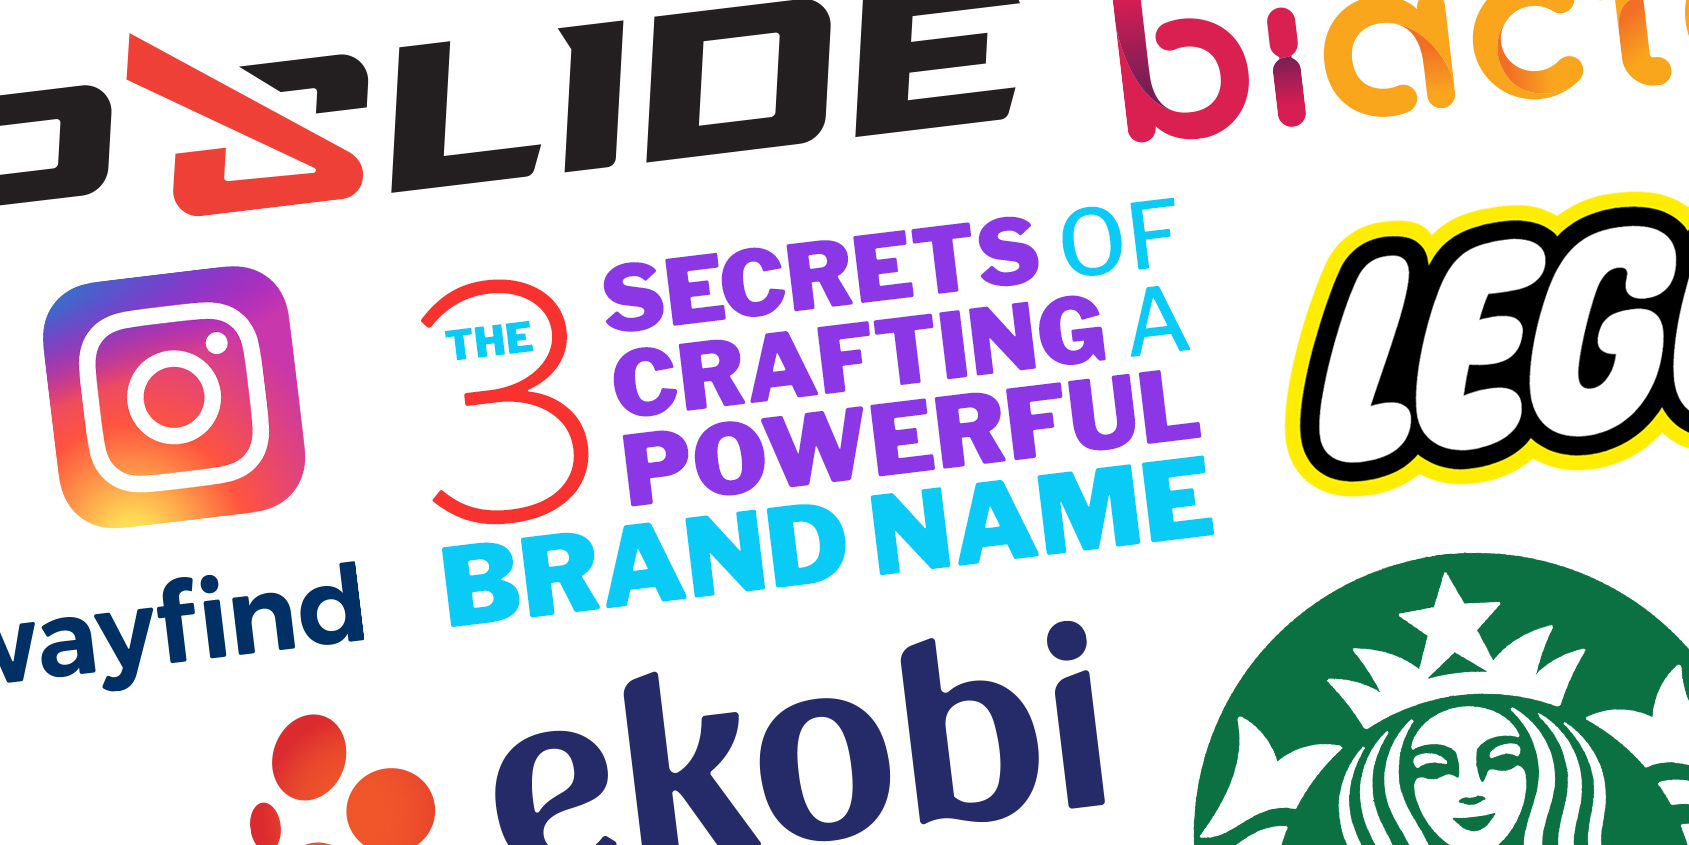 The 3 Secrets of Crafting a Powerful Brand Name